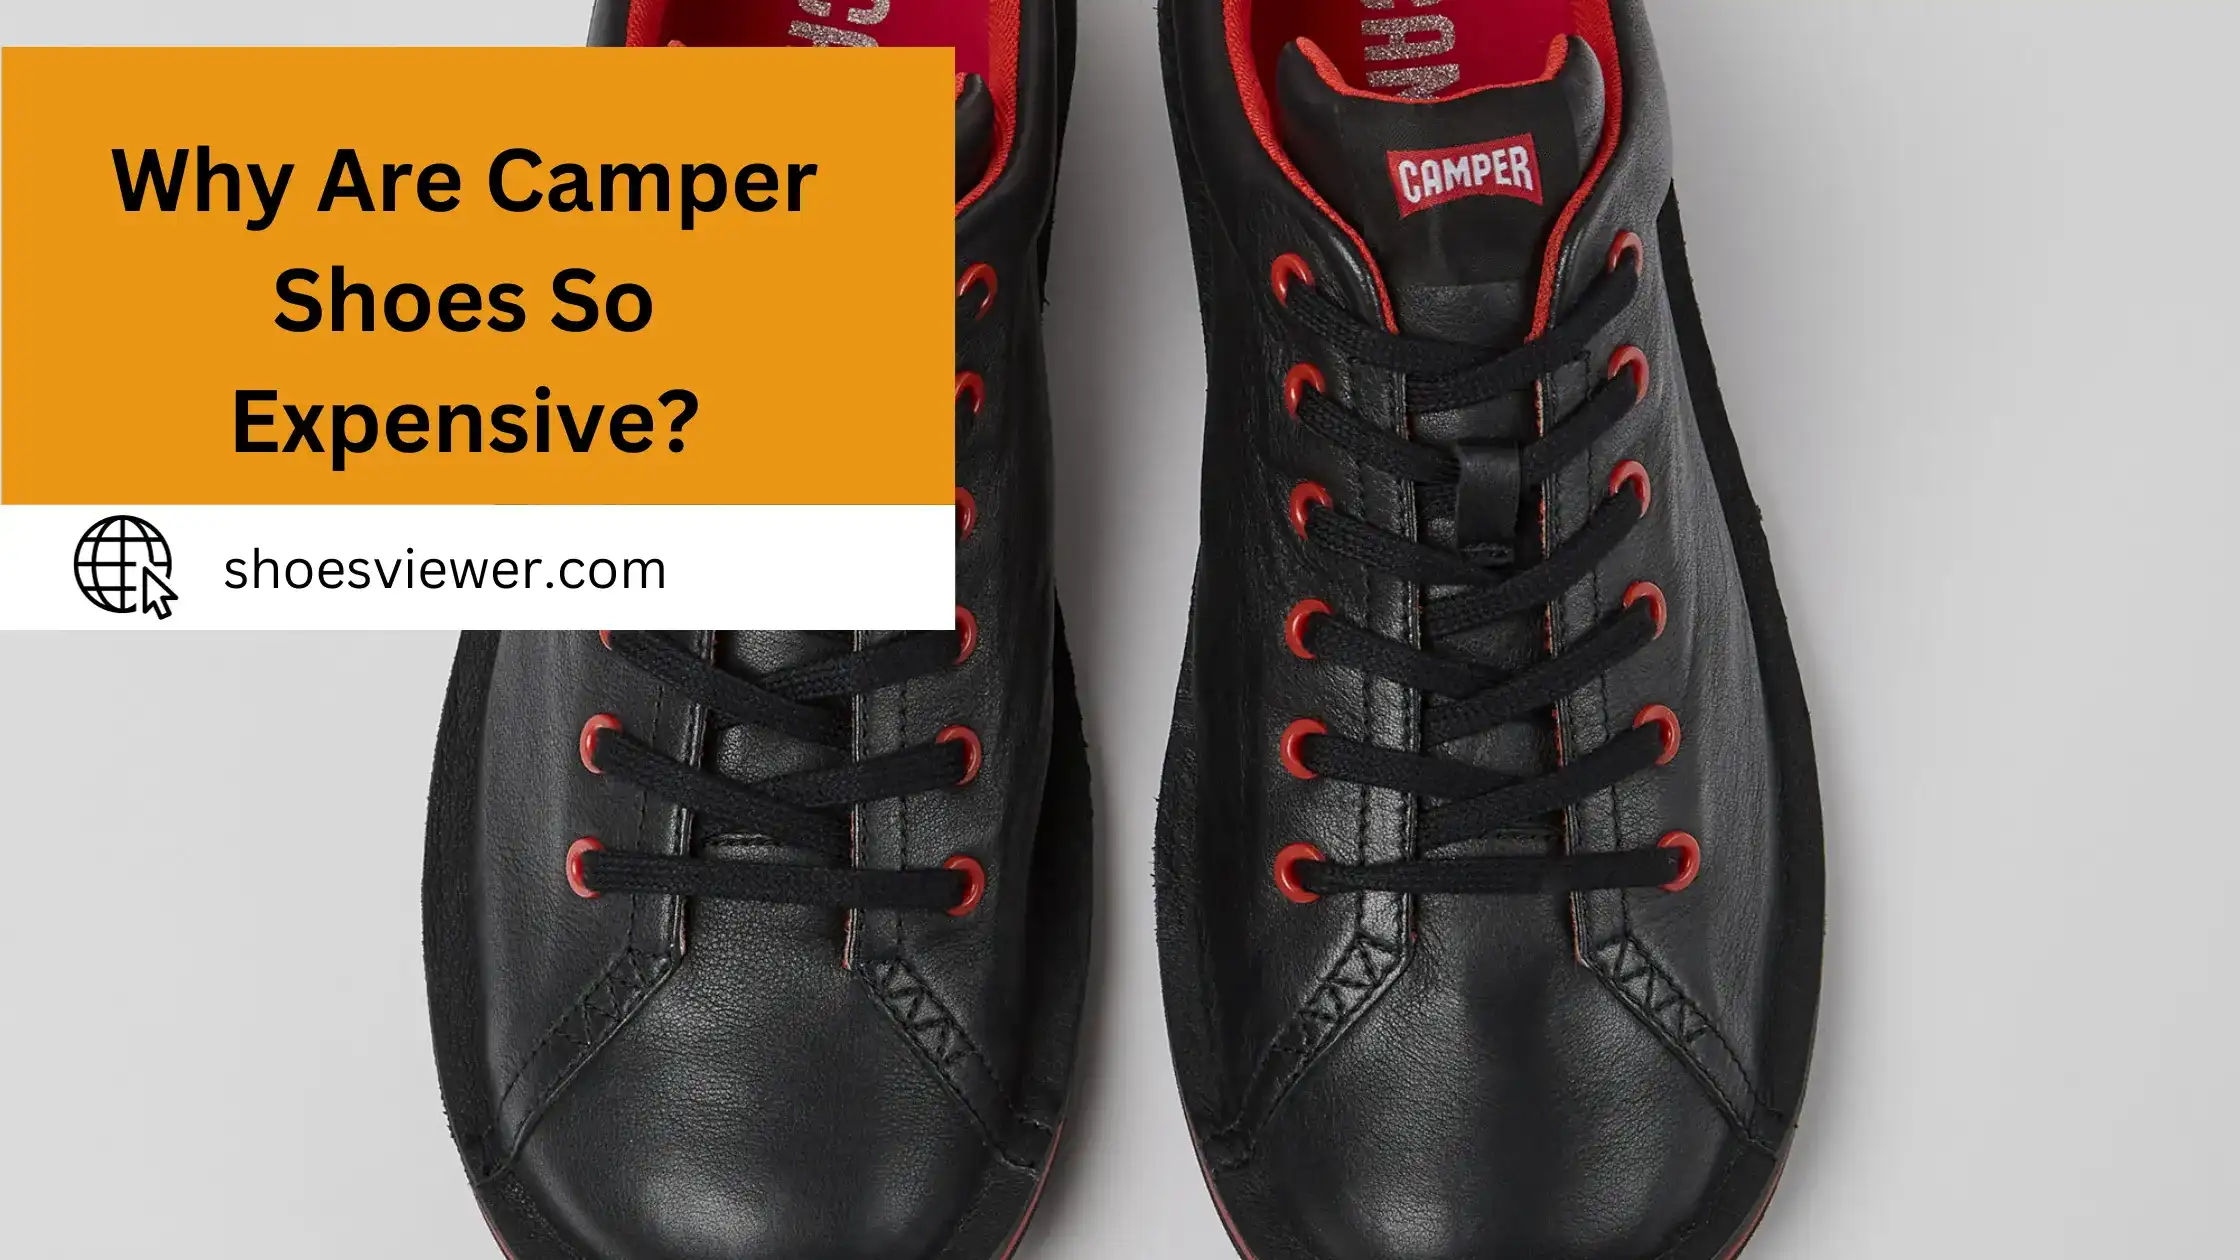 Why Are Camper Shoes So Expensive? Detailed Information